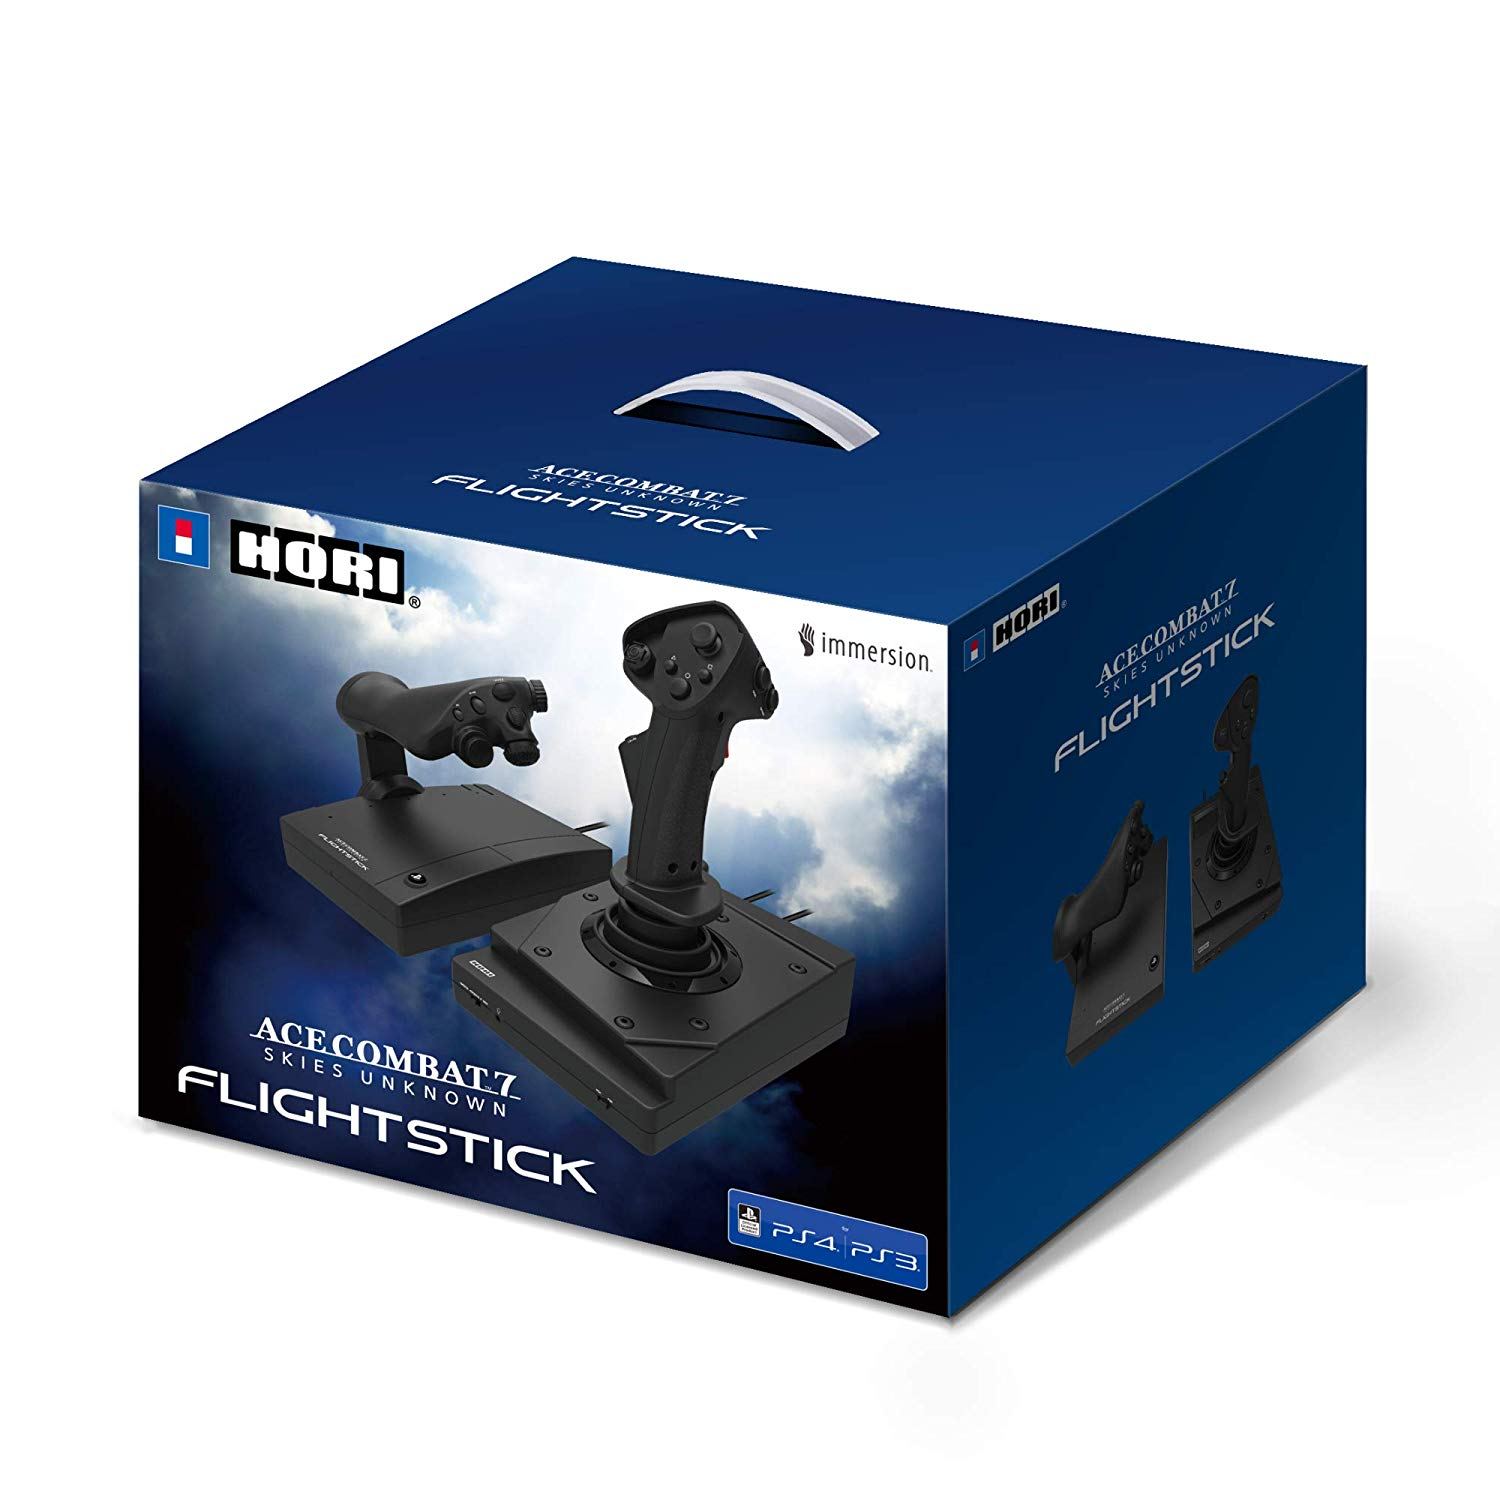 Ace Combat 7 Skies Unknown Flight Stick for PlayStation 4 Windows, PlayStation 3, PlayStation 4